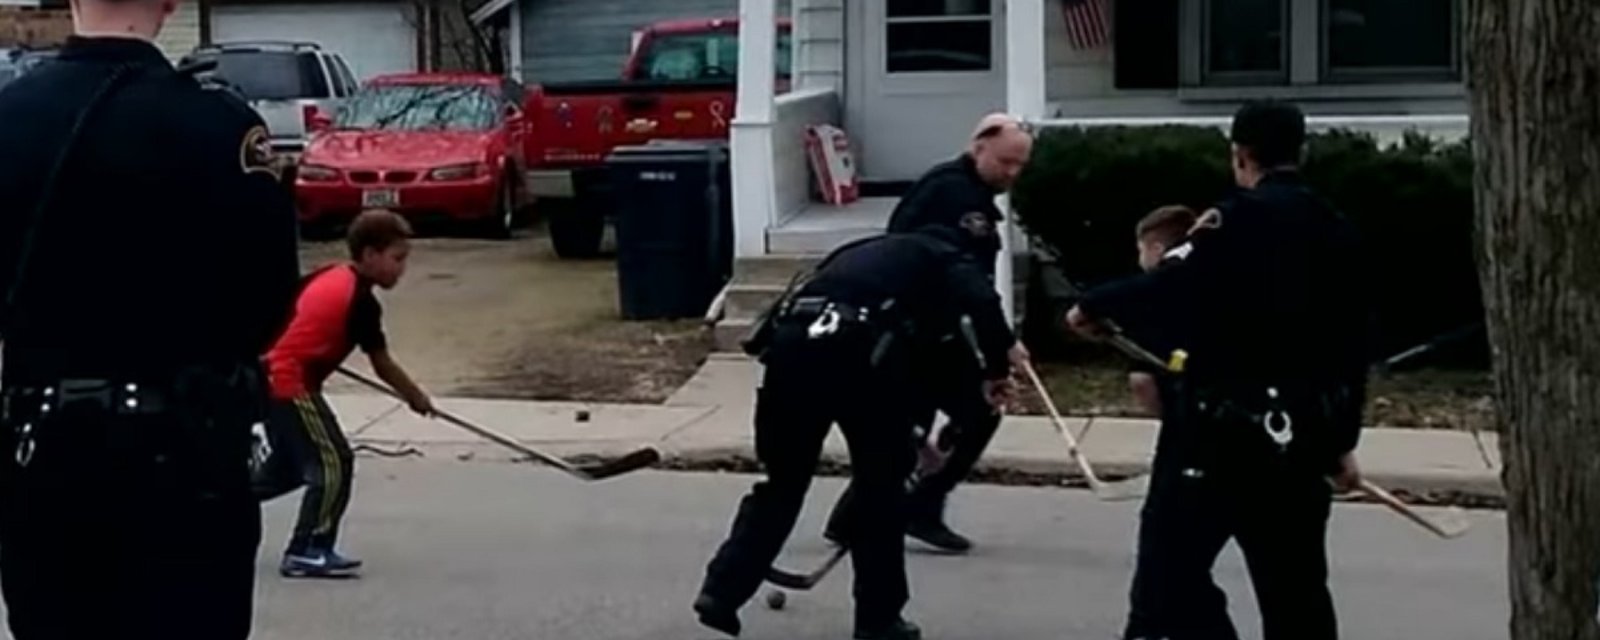 Cops called to stop street hockey game, what they do instead is amazing.